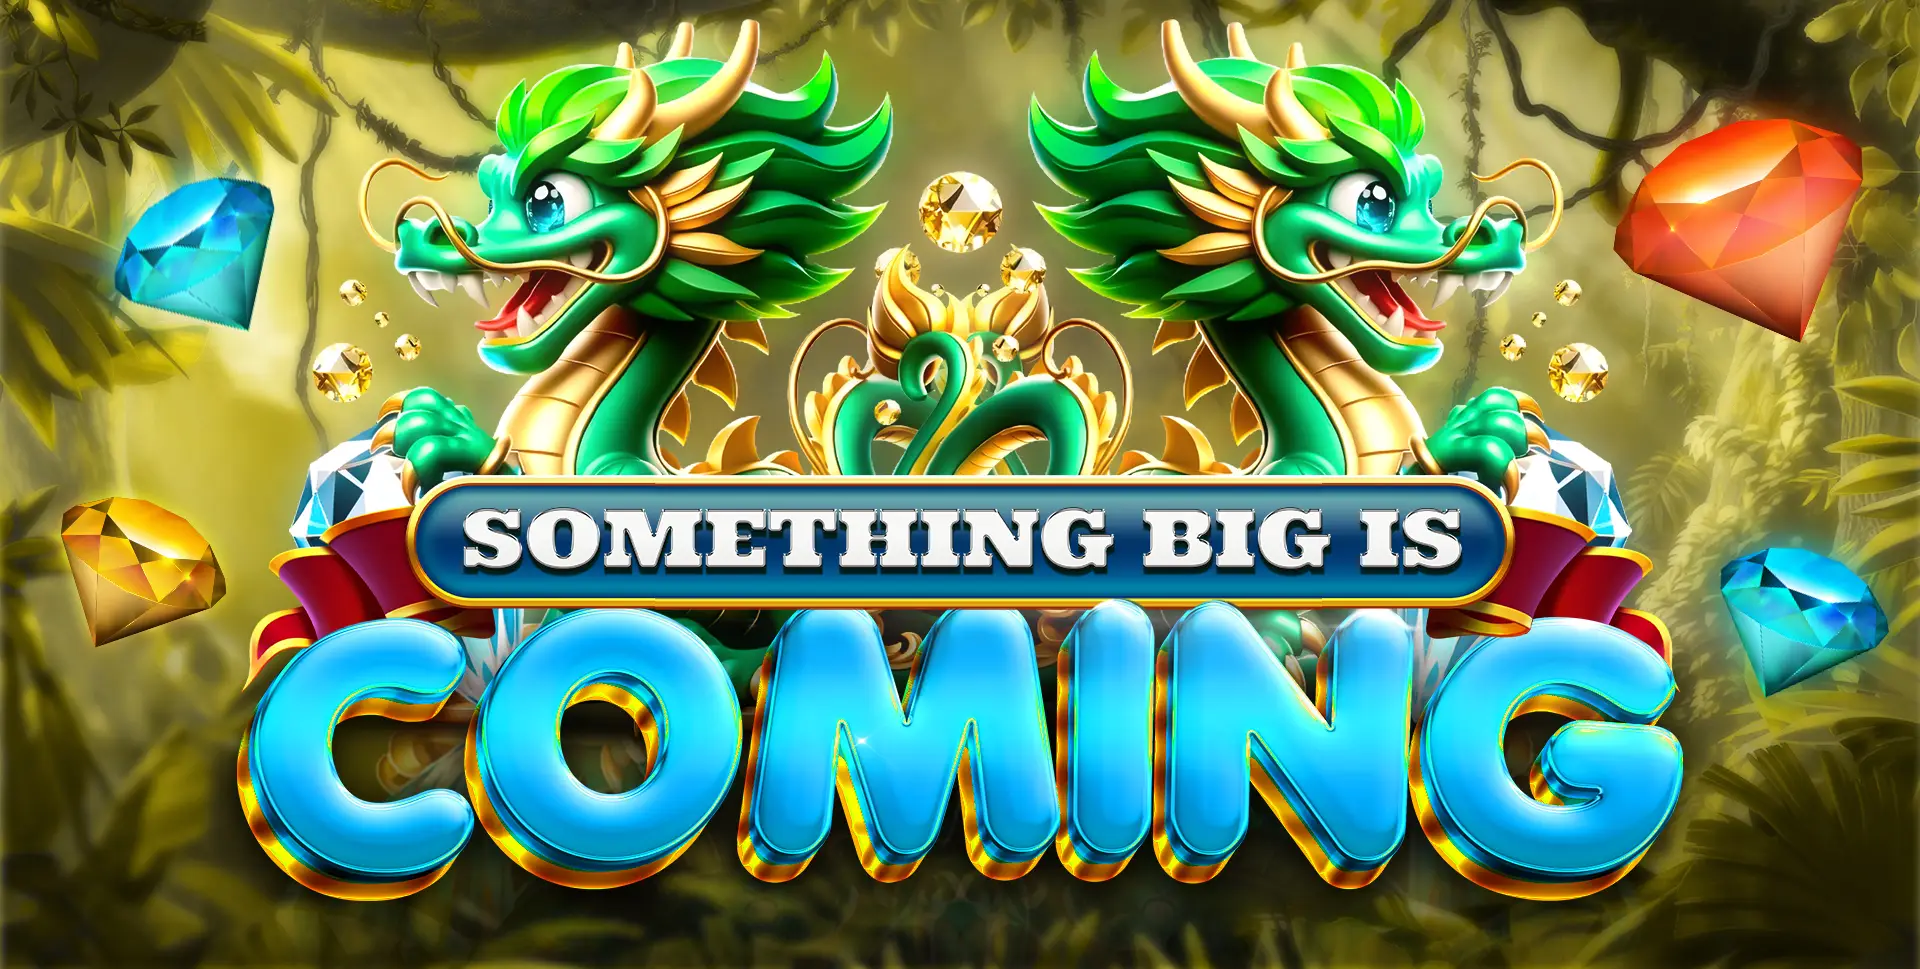 2 emerald dragons holding diamond side by side something big is coming